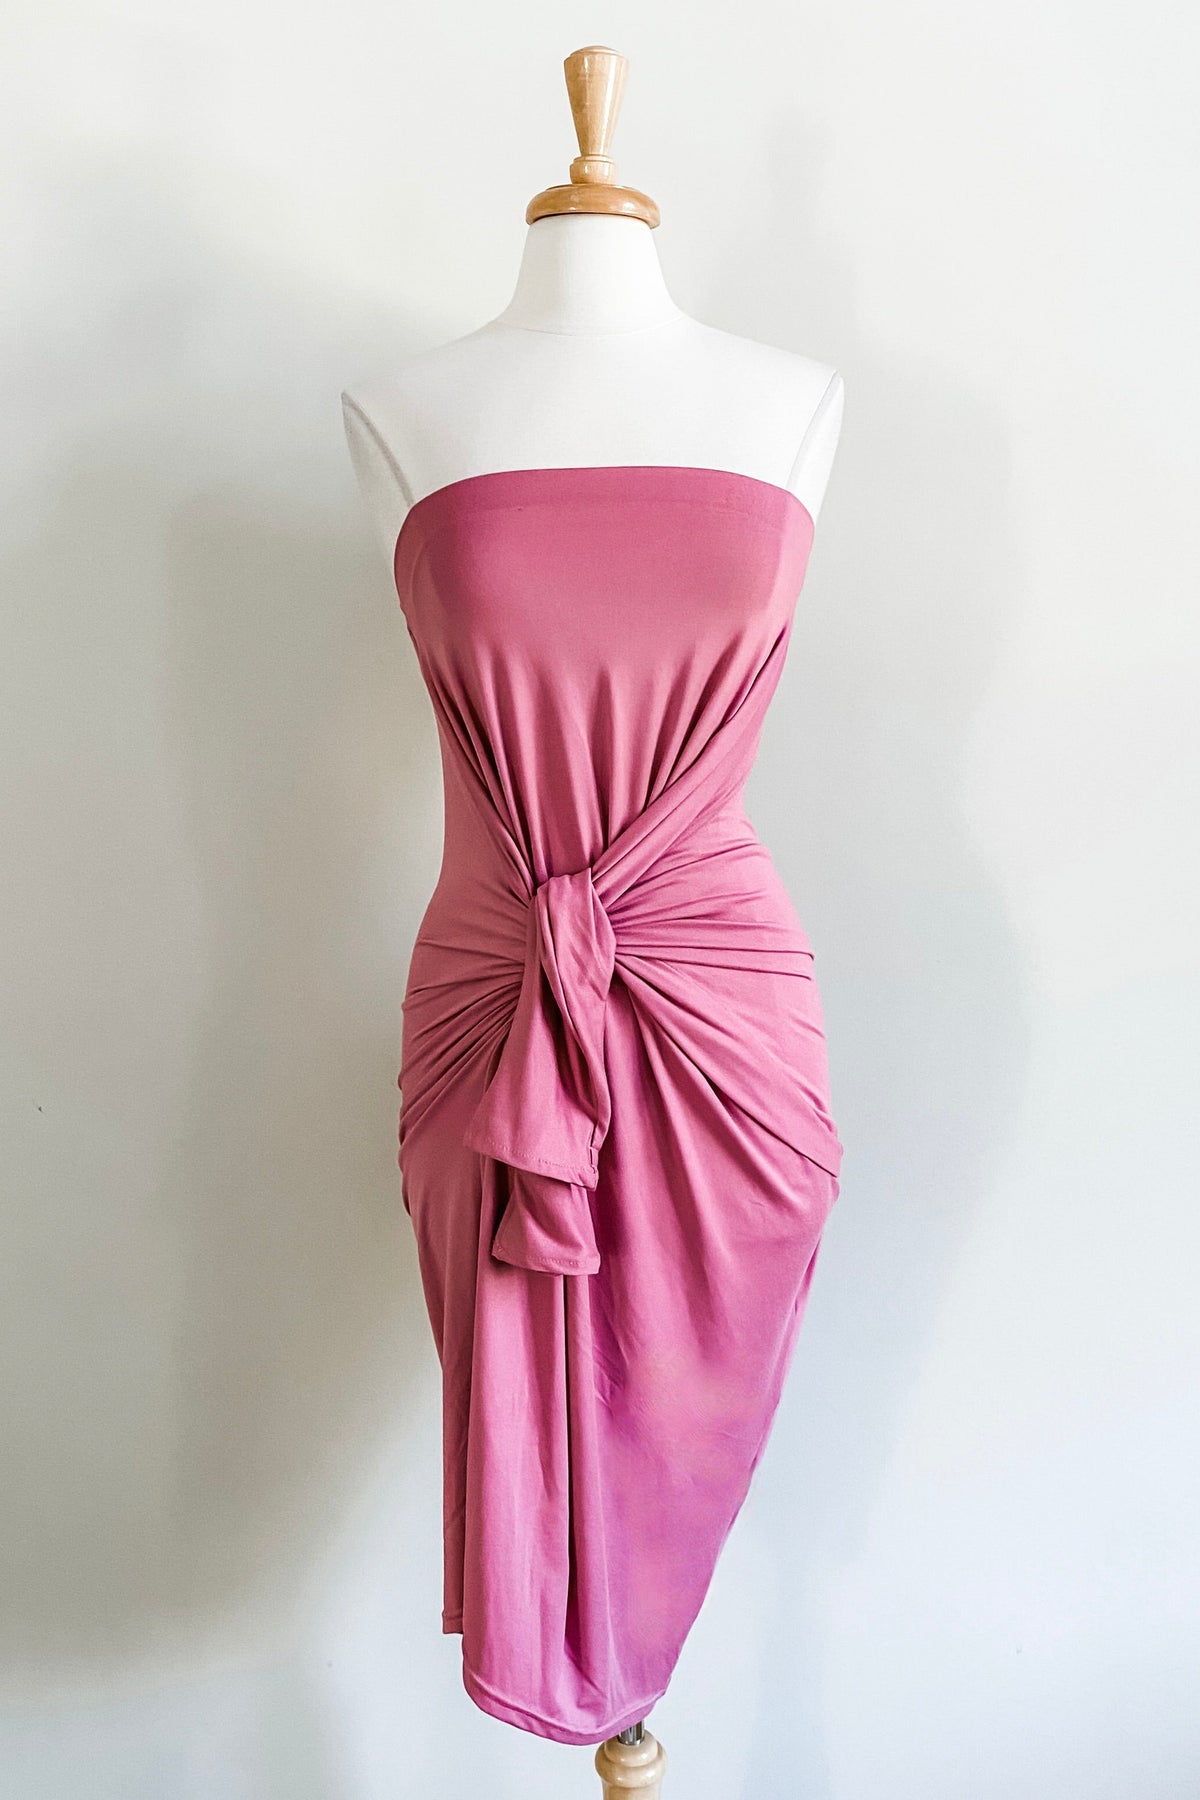 Diane Kroe Origami Dress (Rose) - The Classic Capsule Collection